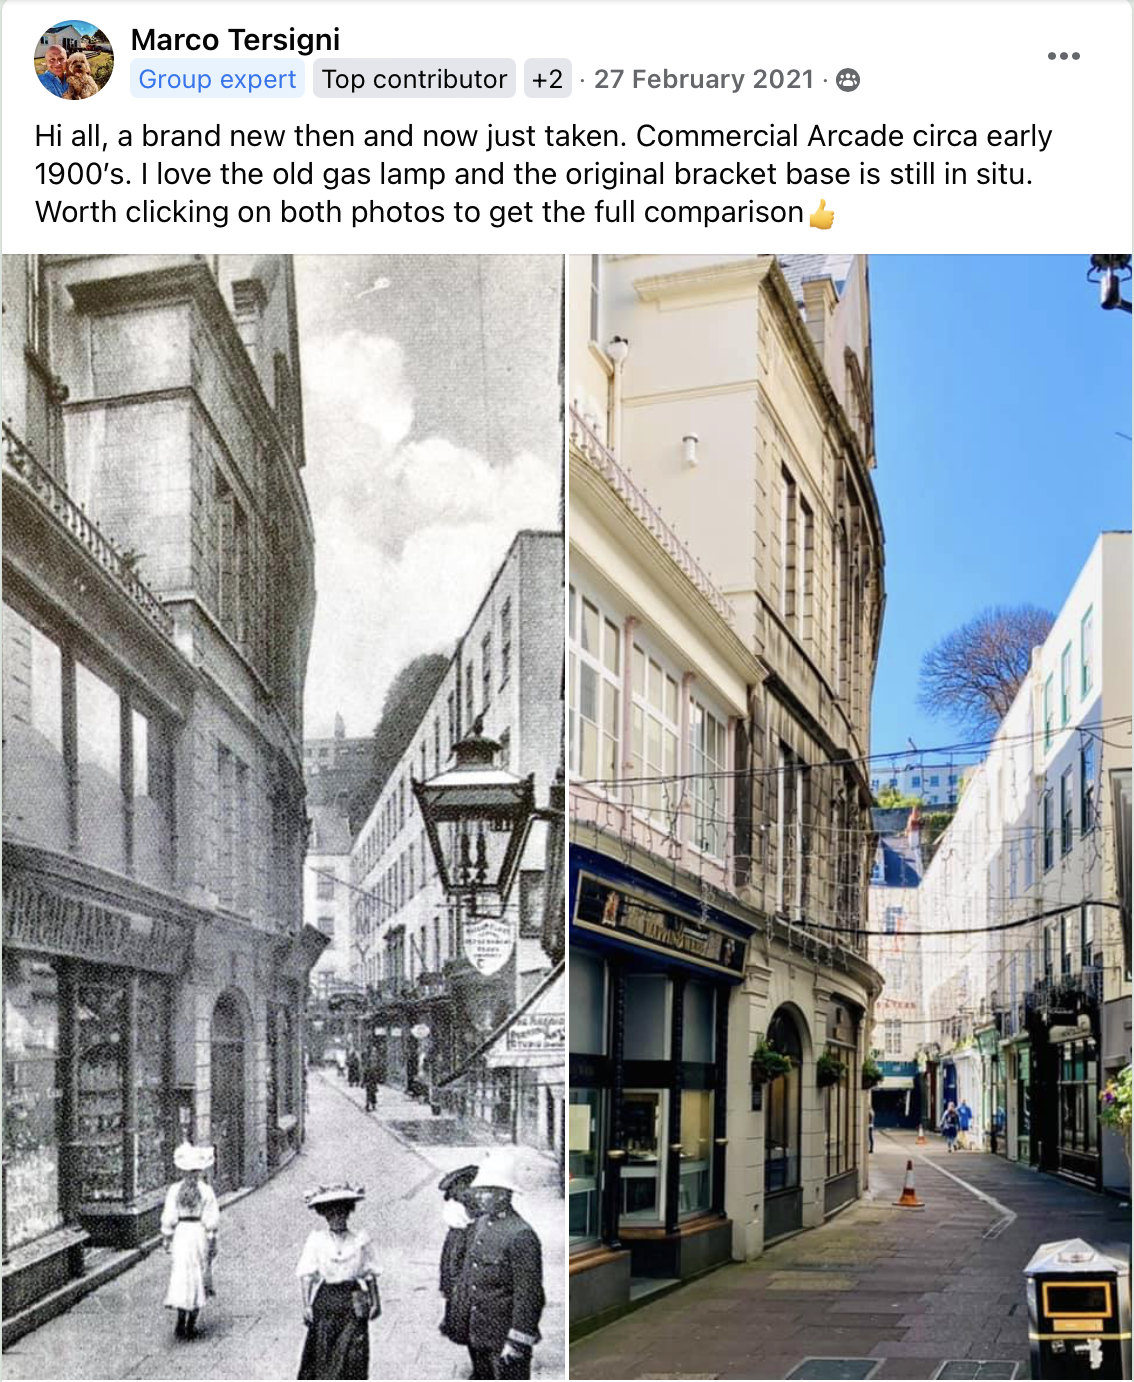 commercial arcade then and now Marco tersigni